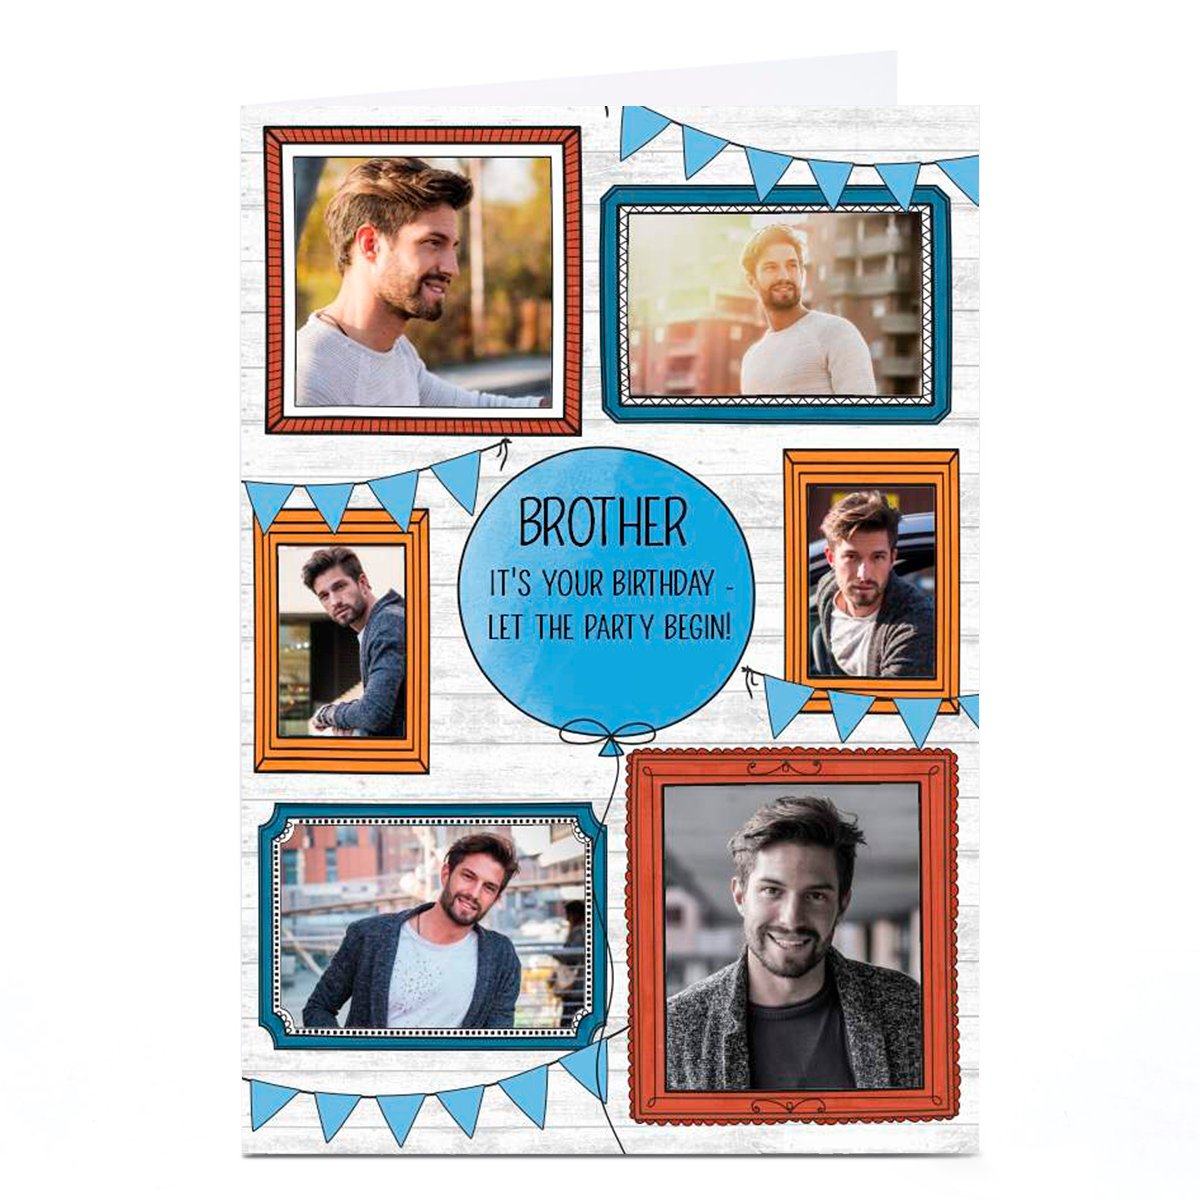 Personalised Birthday Photo Card - Frames & Bunting, Brother